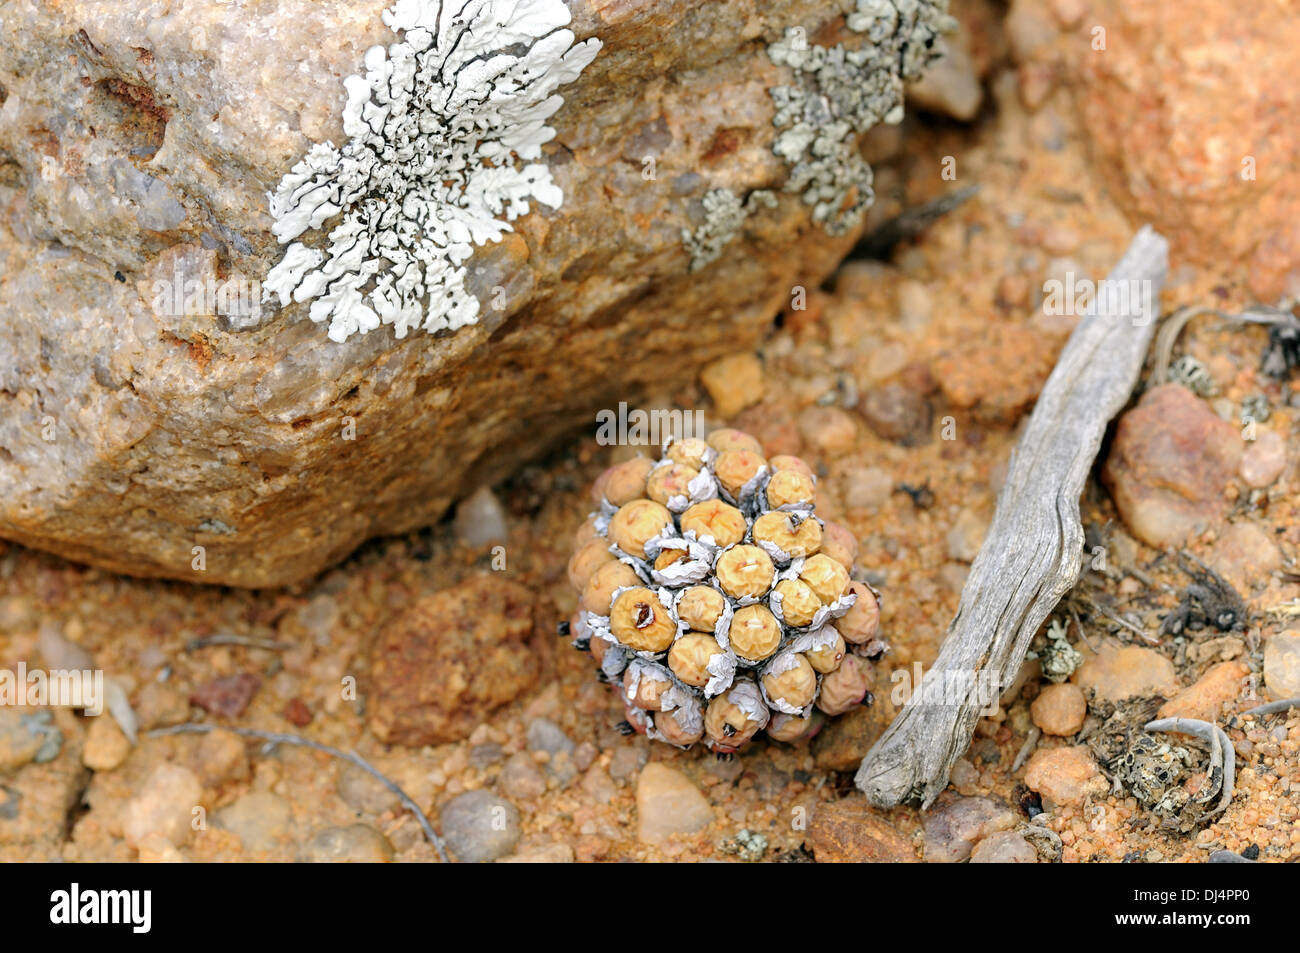 Conophytum sp. waiting for the rainfall Stock Photo